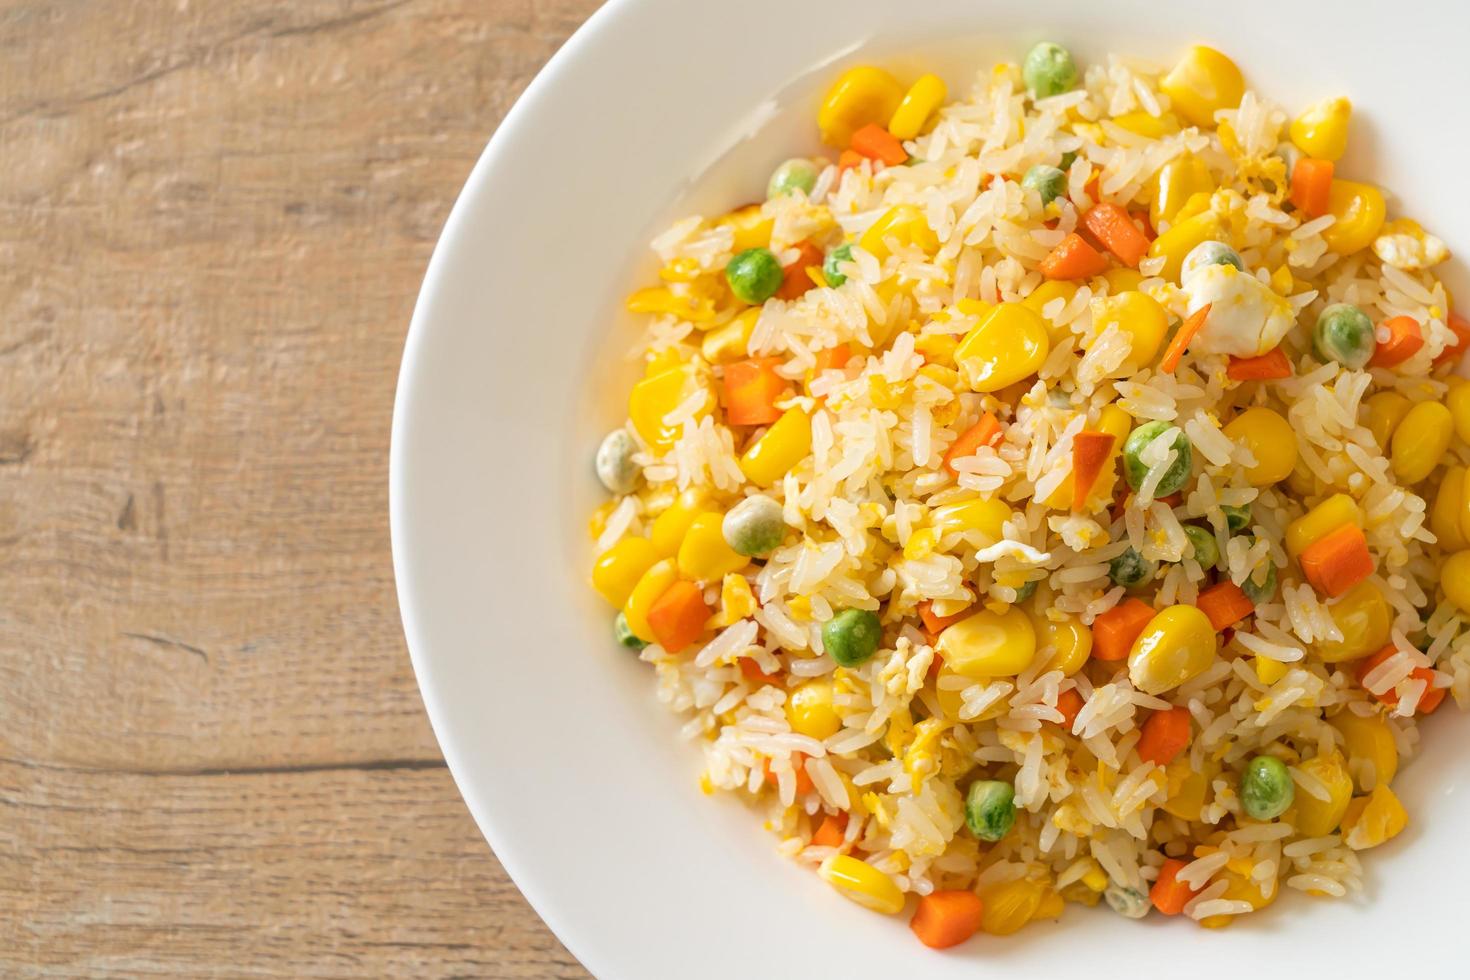 Homemade fried rice with mixed vegetables of carrots, green bean peas, corn, and egg photo